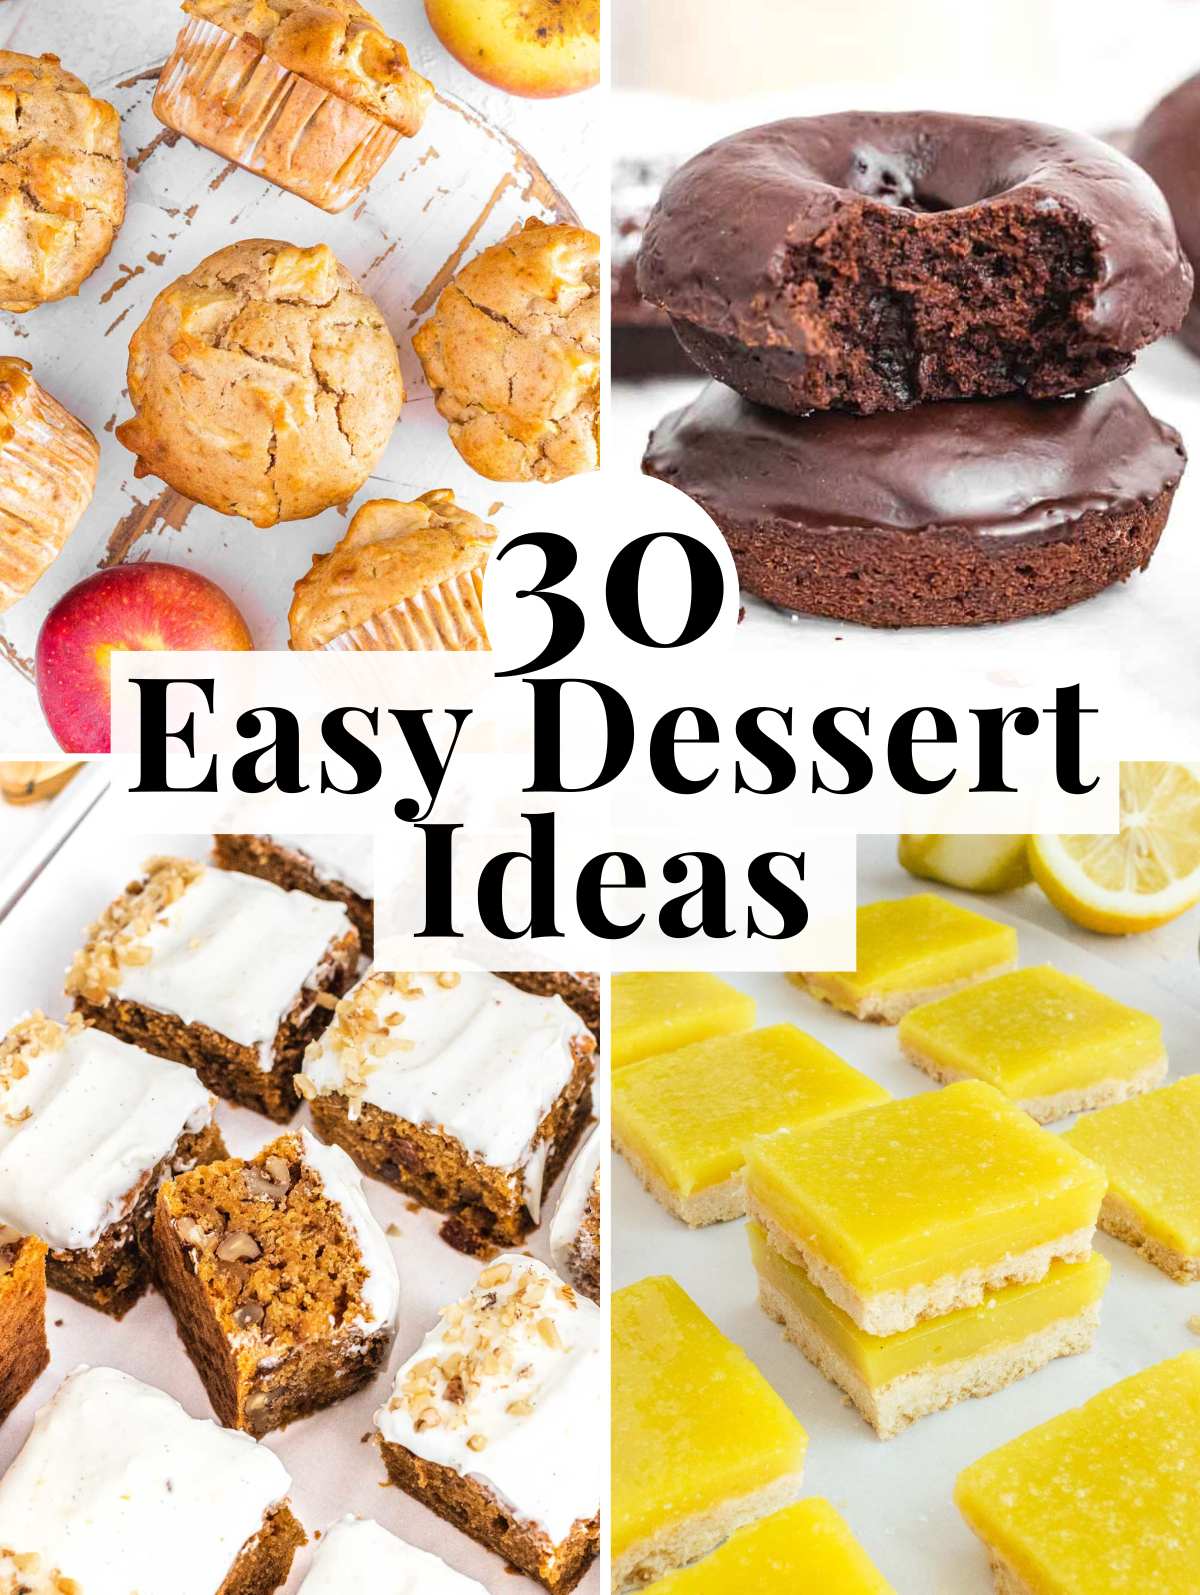 Easy dessert ideas with easy baking recipes